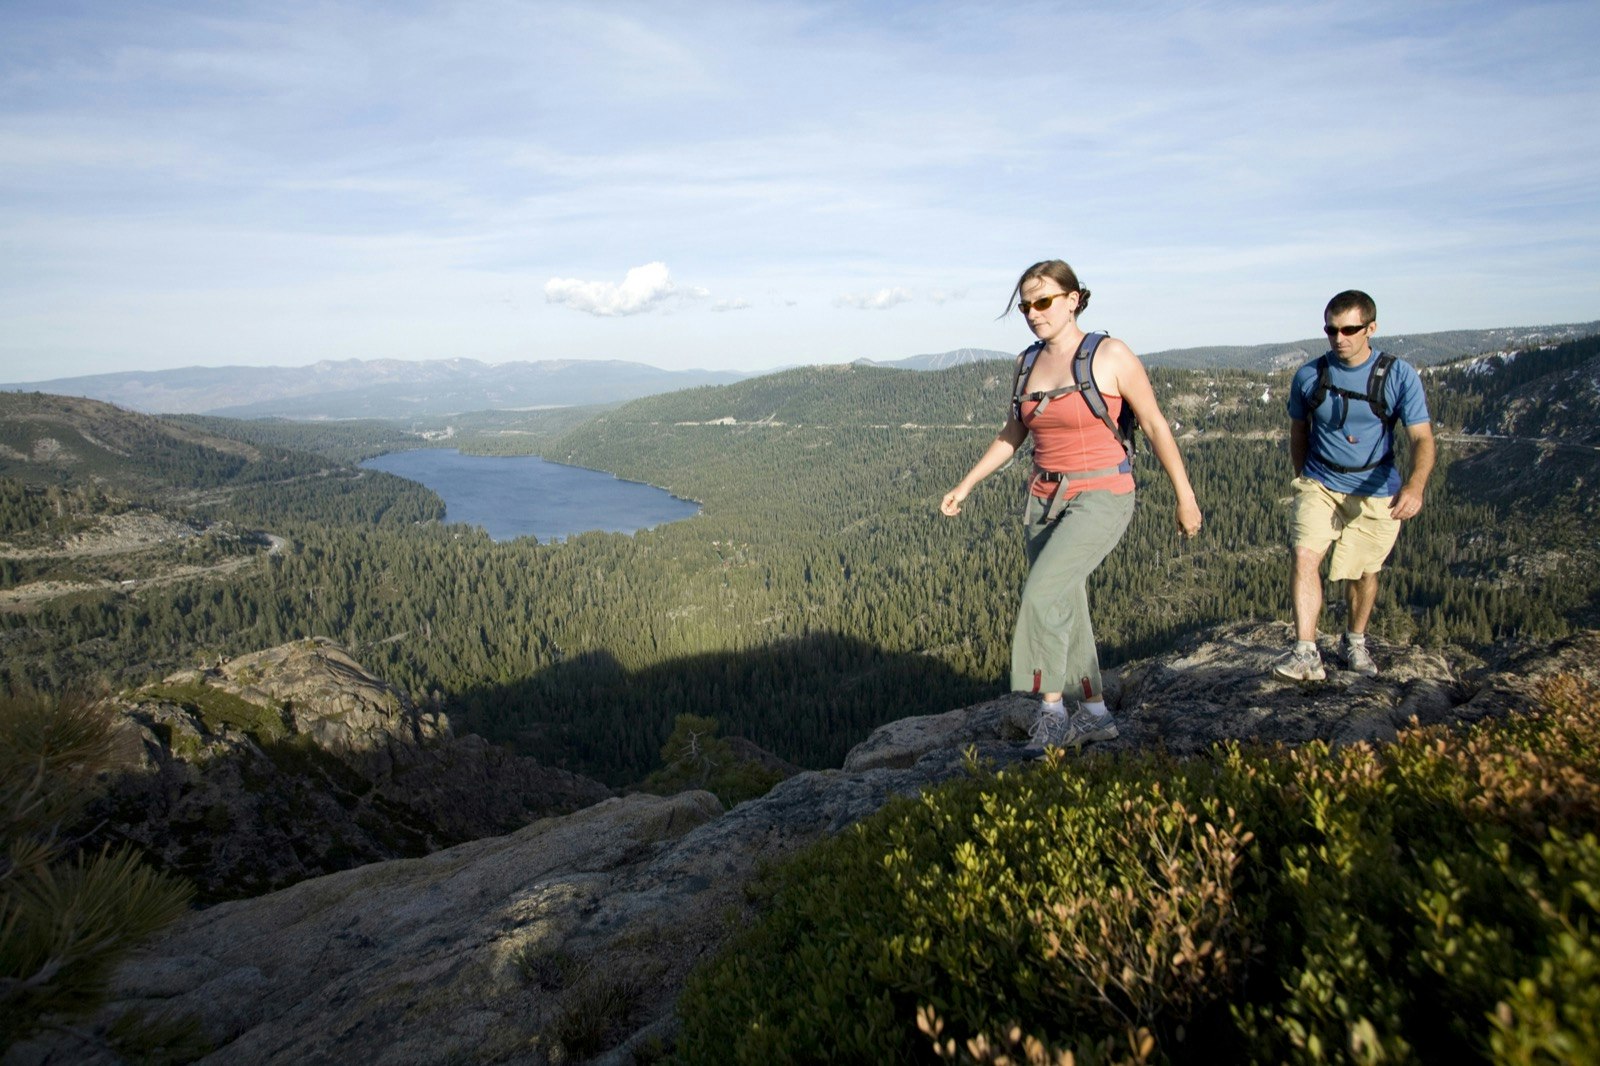 A man and woman hike a ridge line with pine trees and a lake in the distance